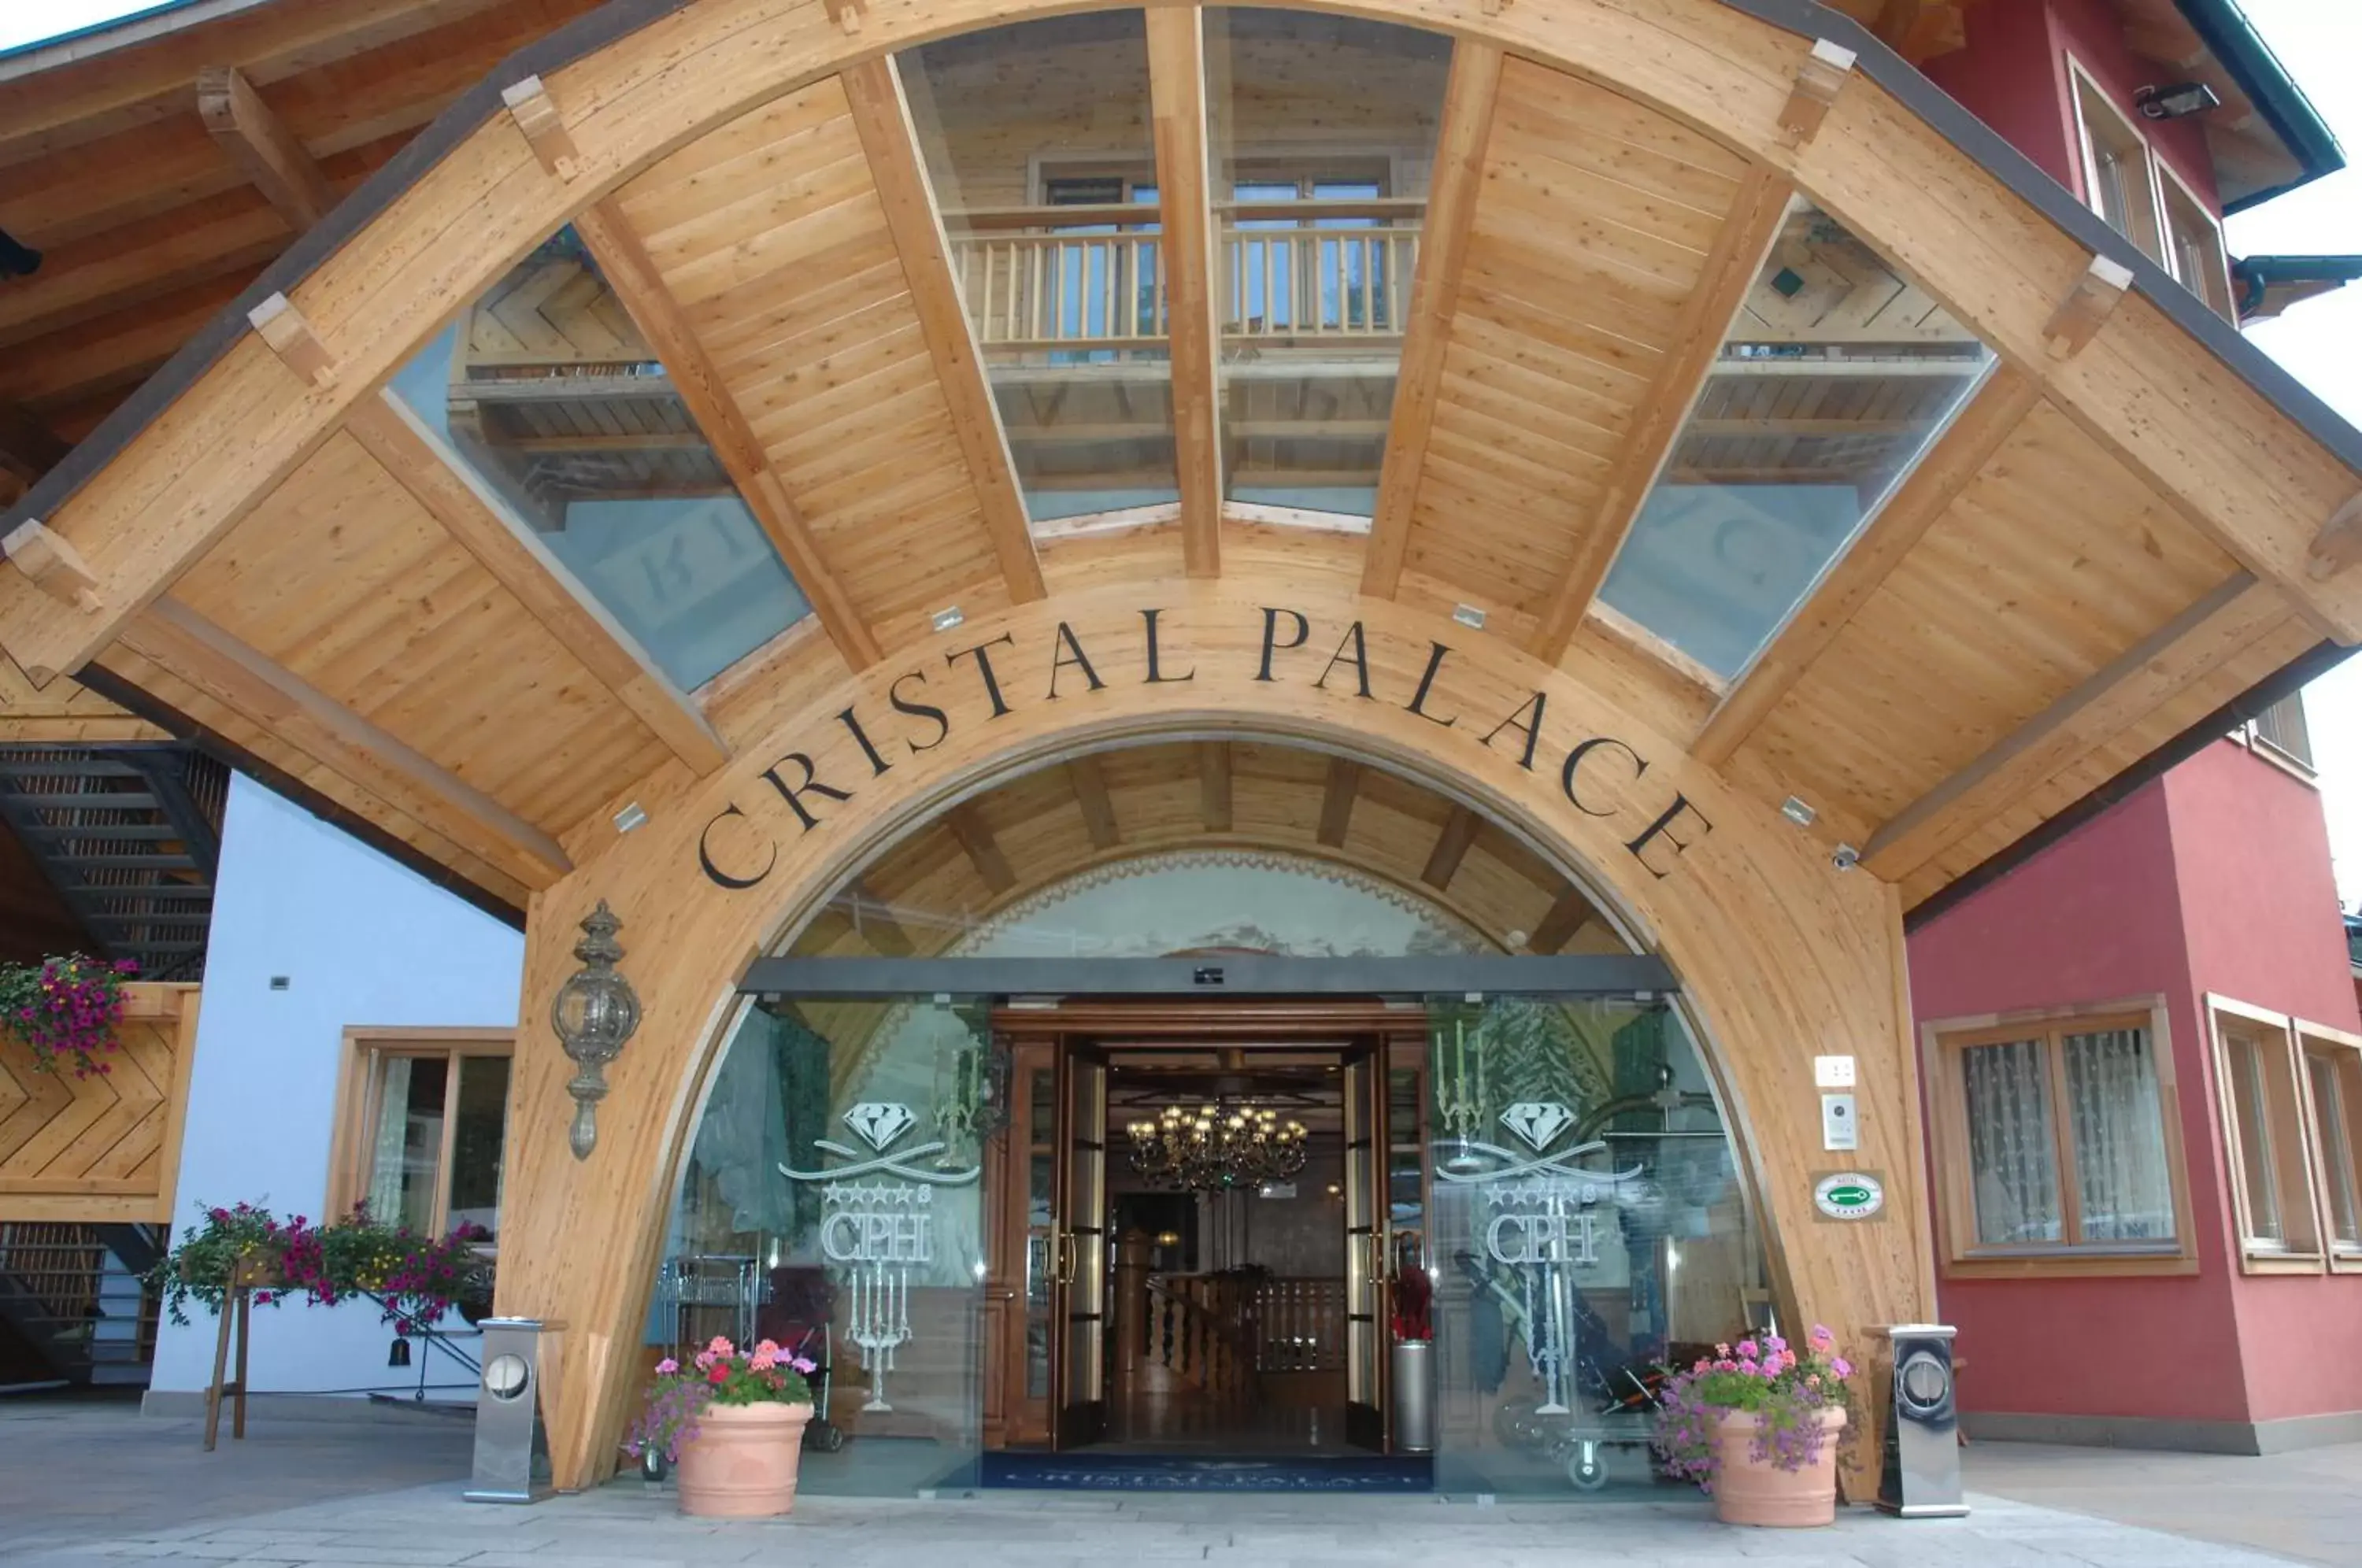 Property building in Cristal Palace Hotel